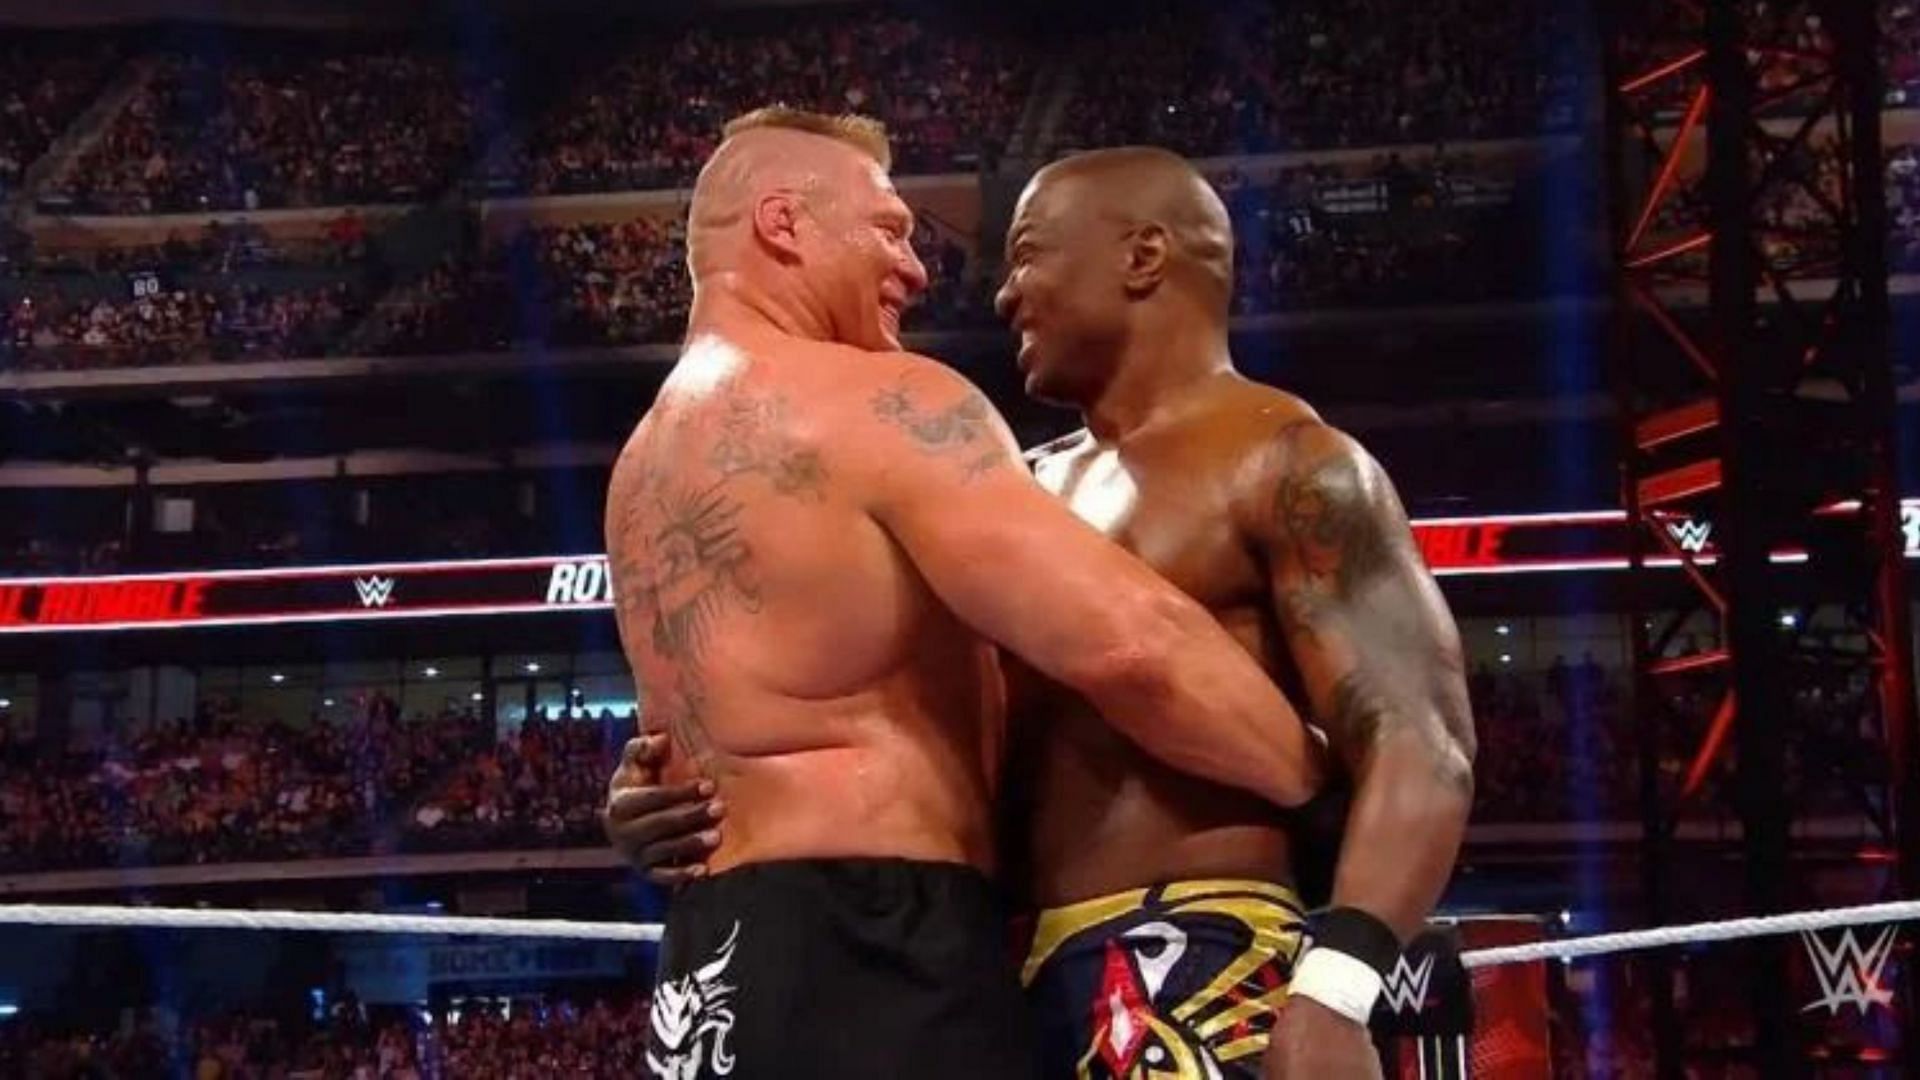 Brock Lesnar and Shelton Benjamin became friends before joining WWE